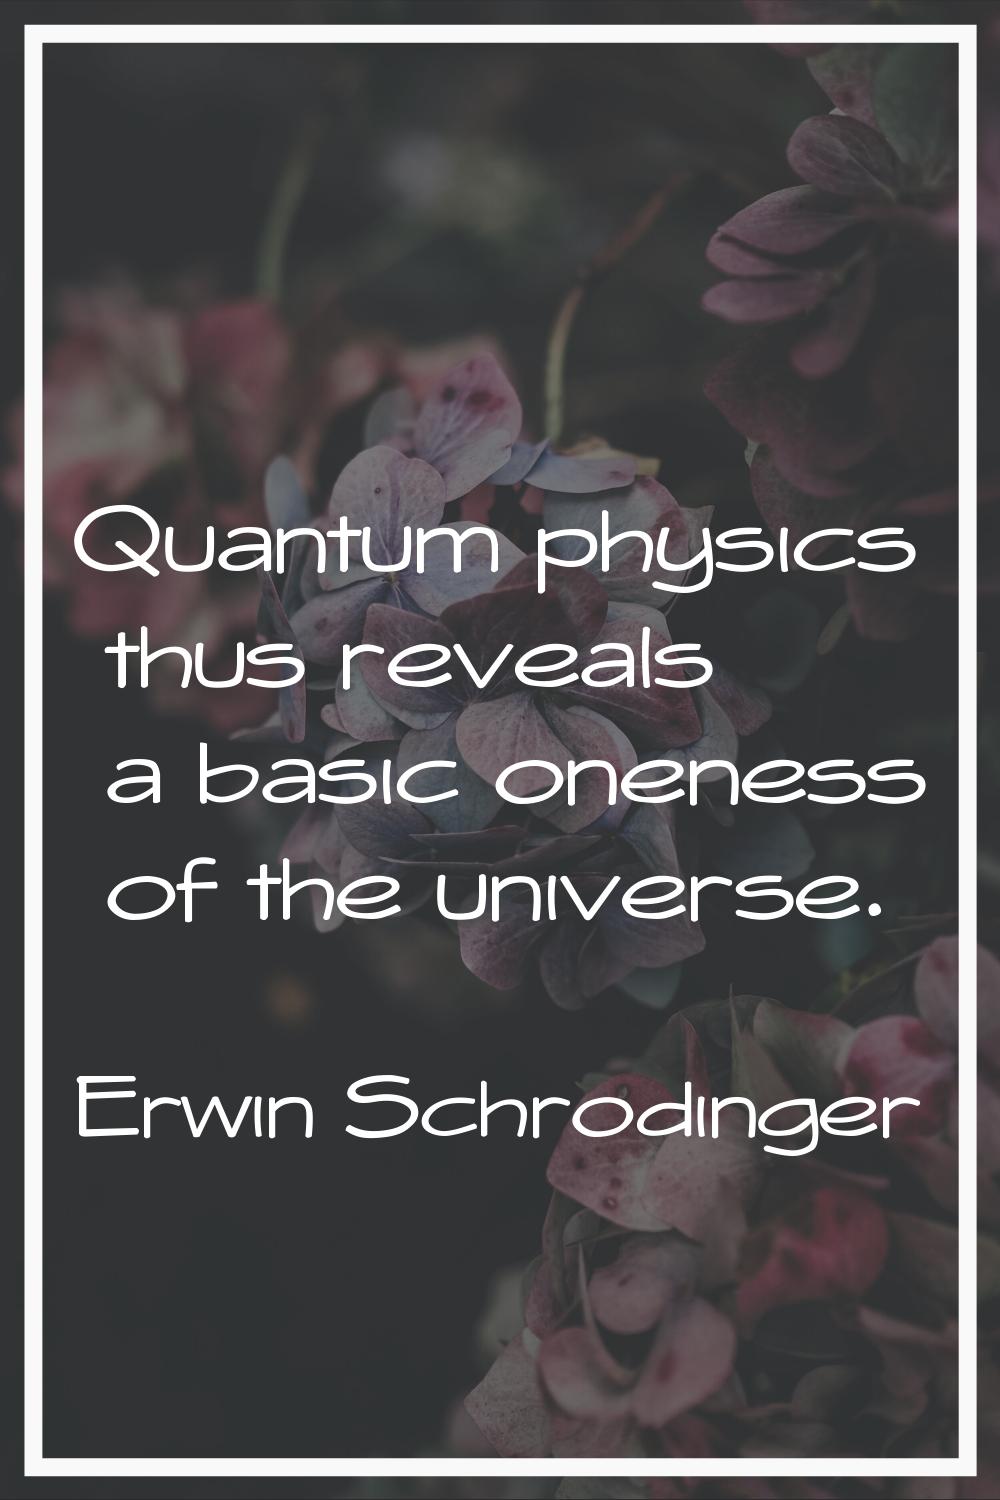 Quantum physics thus reveals a basic oneness of the universe.